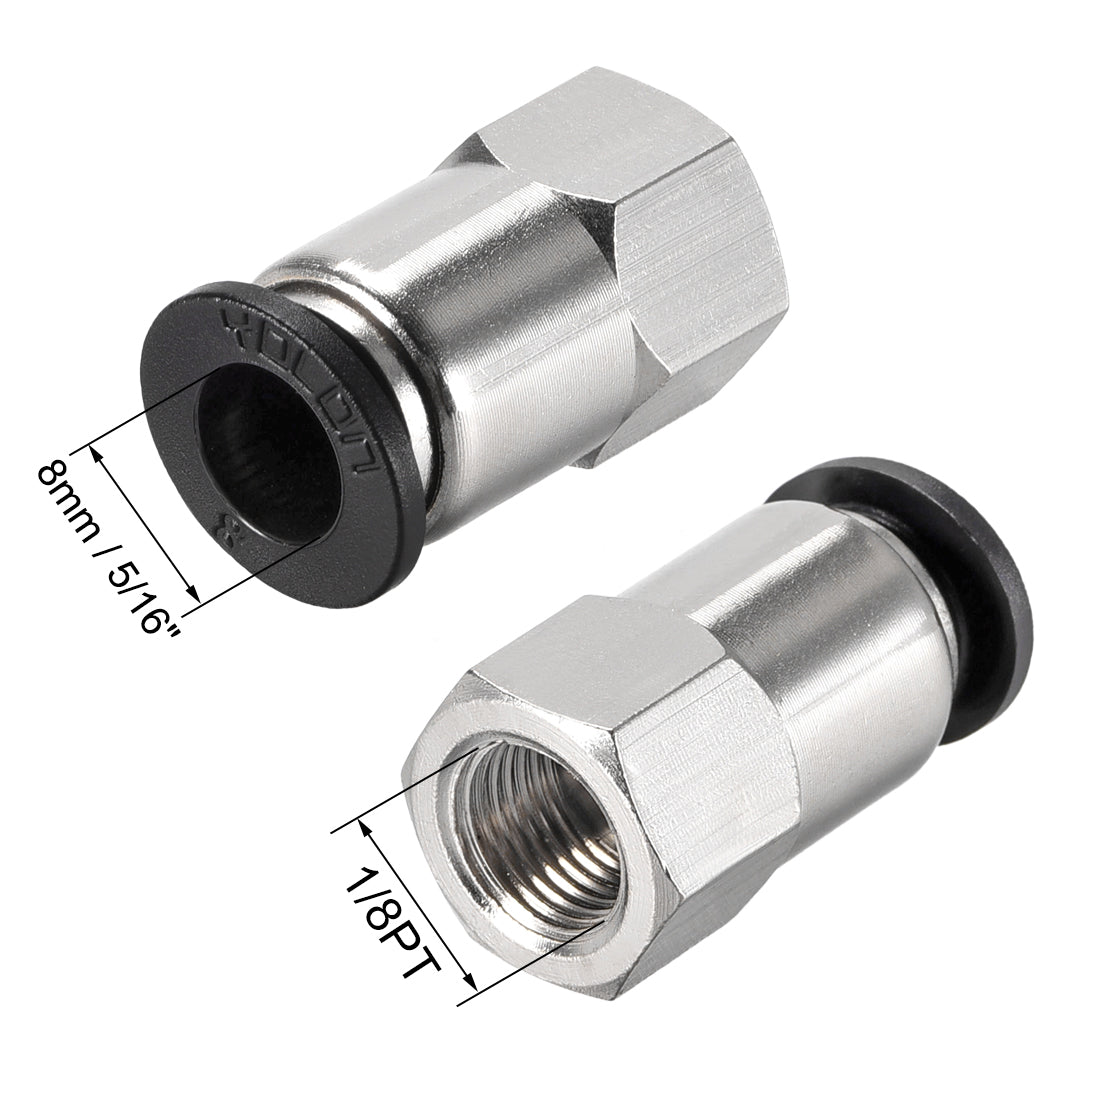 uxcell Uxcell Push to Connect Tube Fitting Adapter 8mm Tube OD x 1/8PT Female Straight Pneumatic Connecter Pipe Fitting